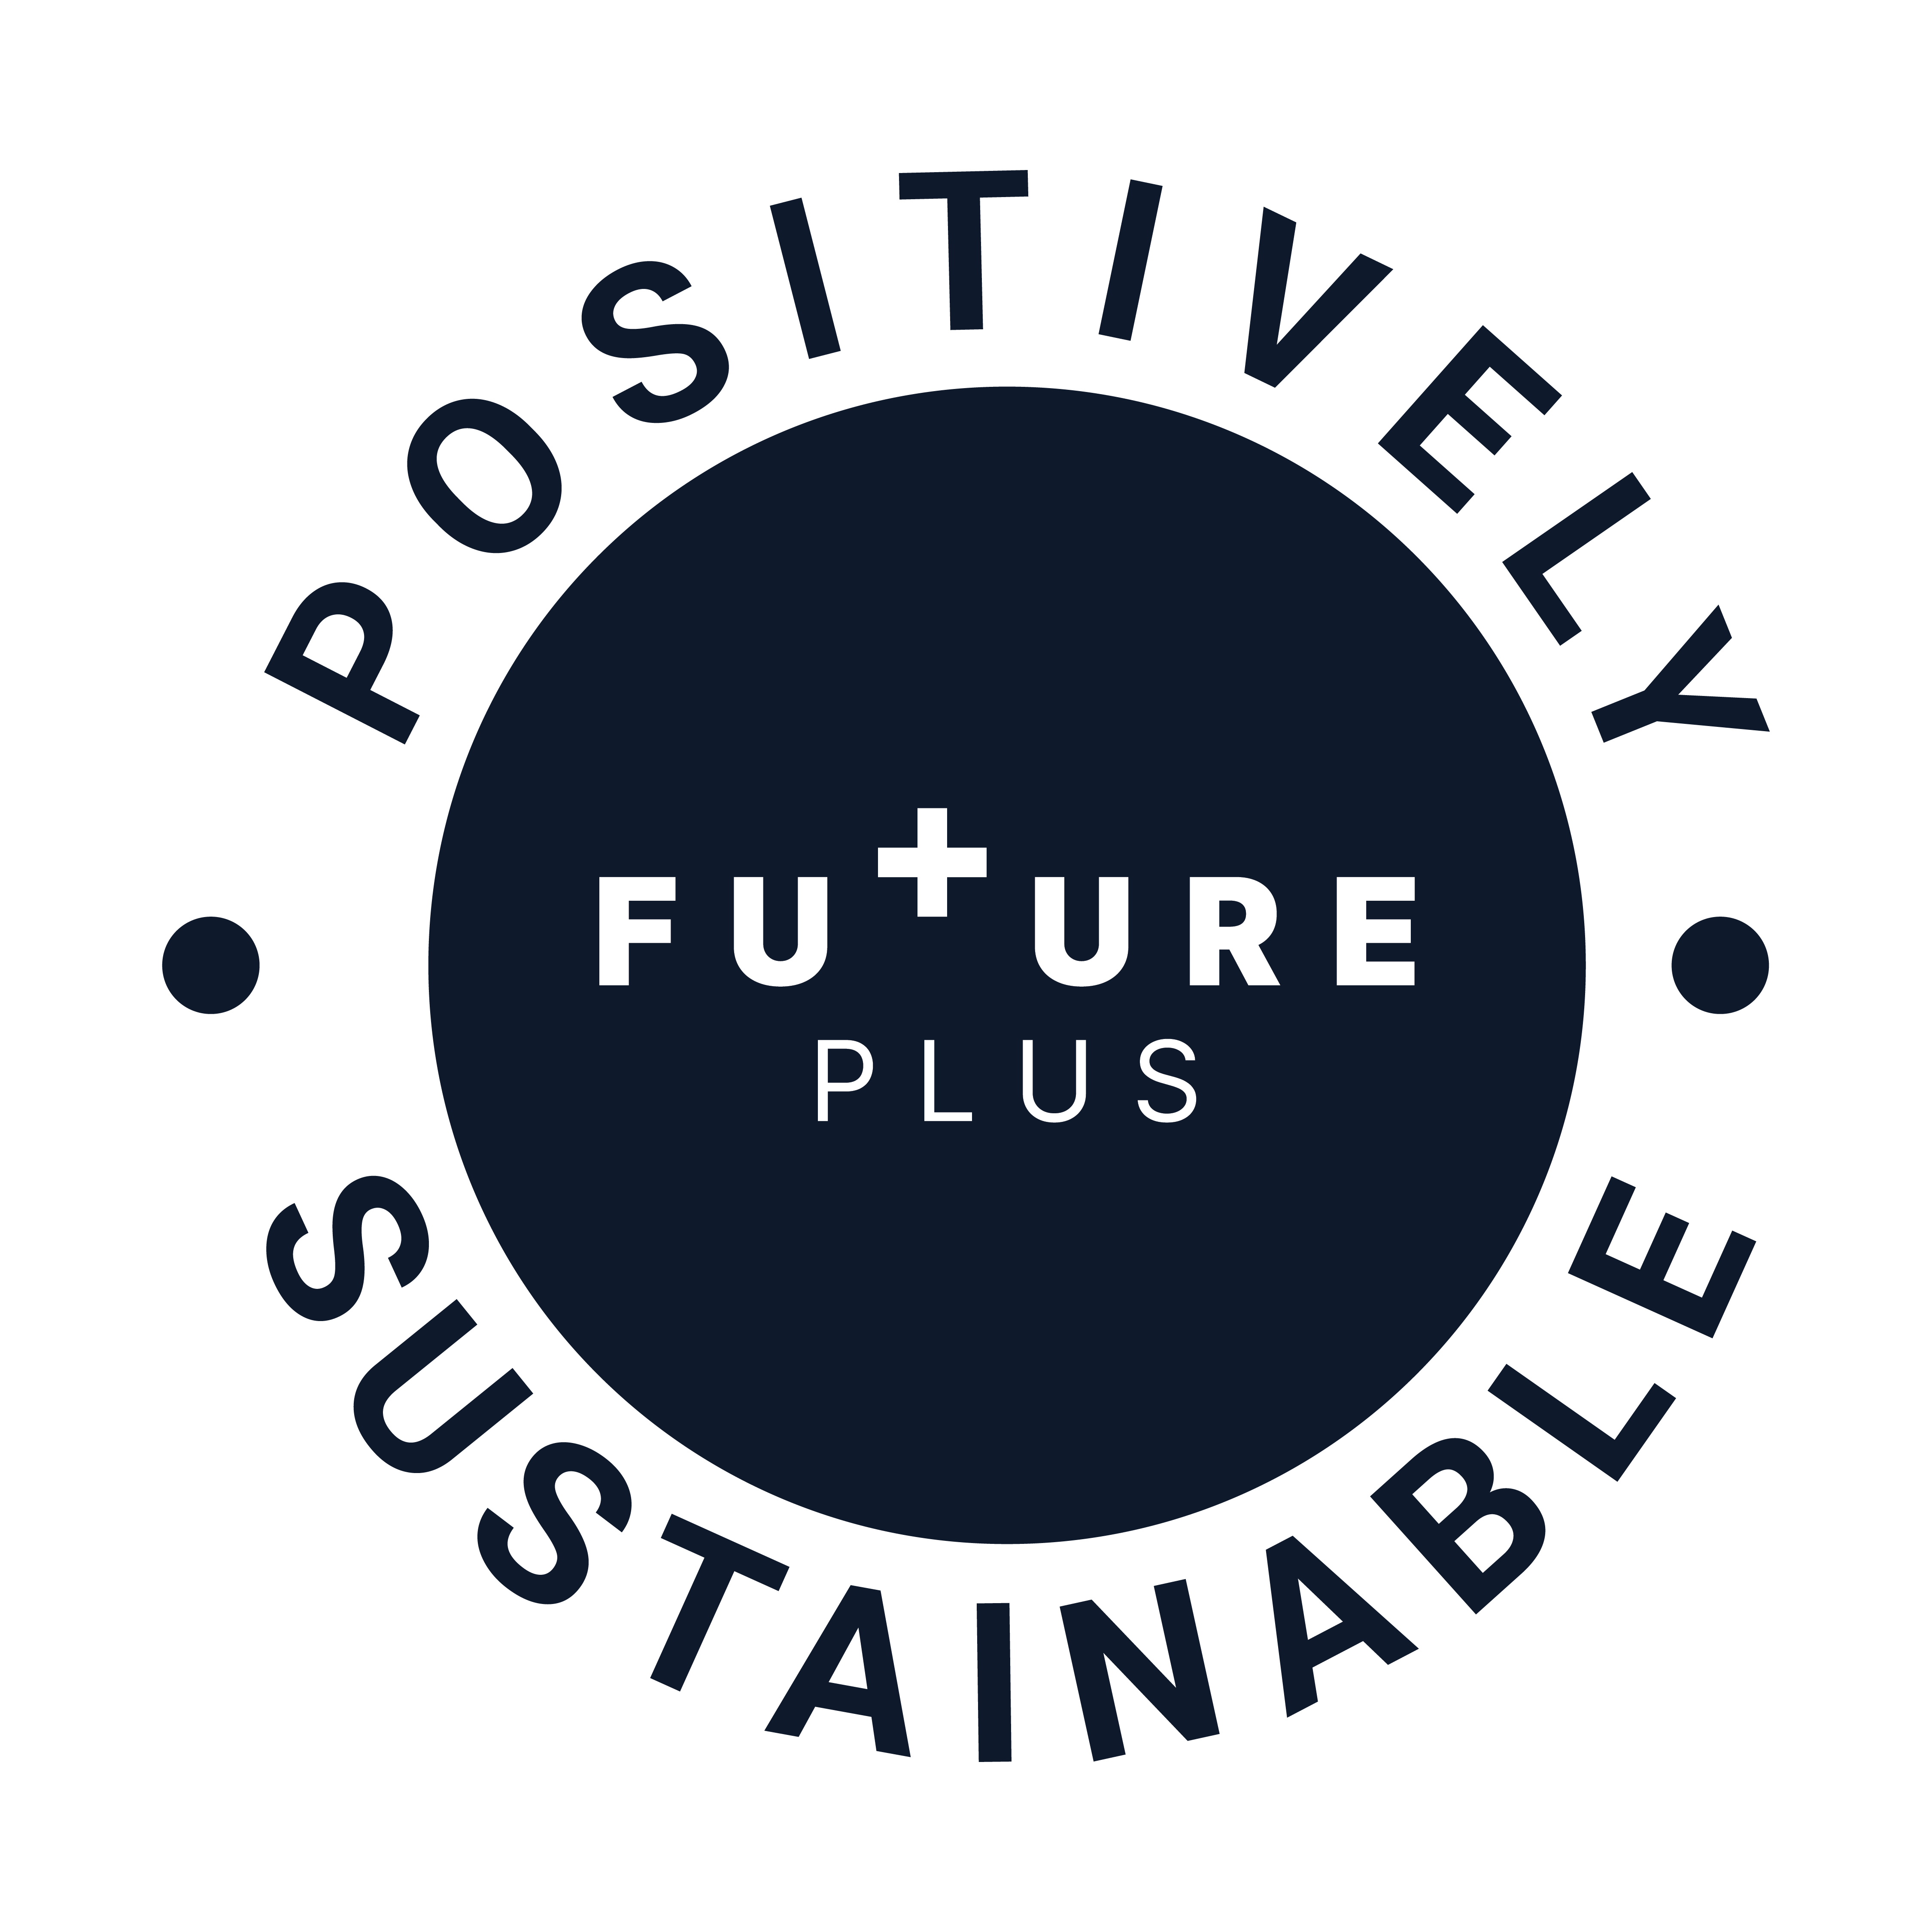 Positively Sustainable